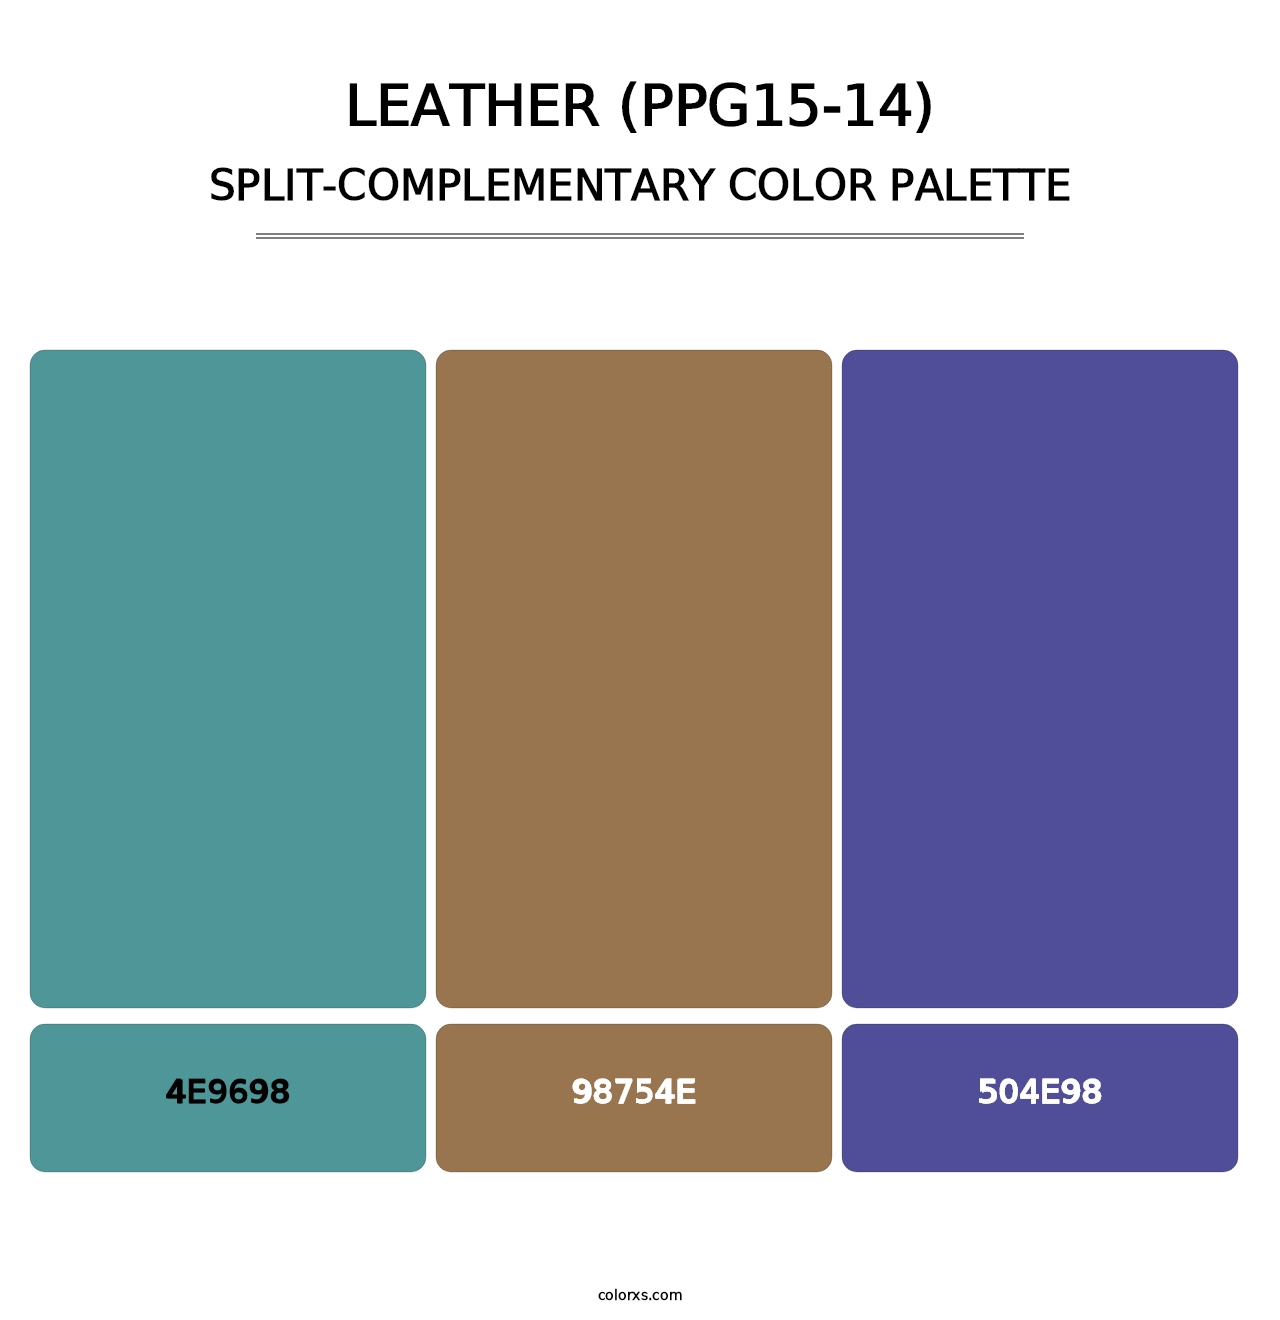 Leather (PPG15-14) - Split-Complementary Color Palette